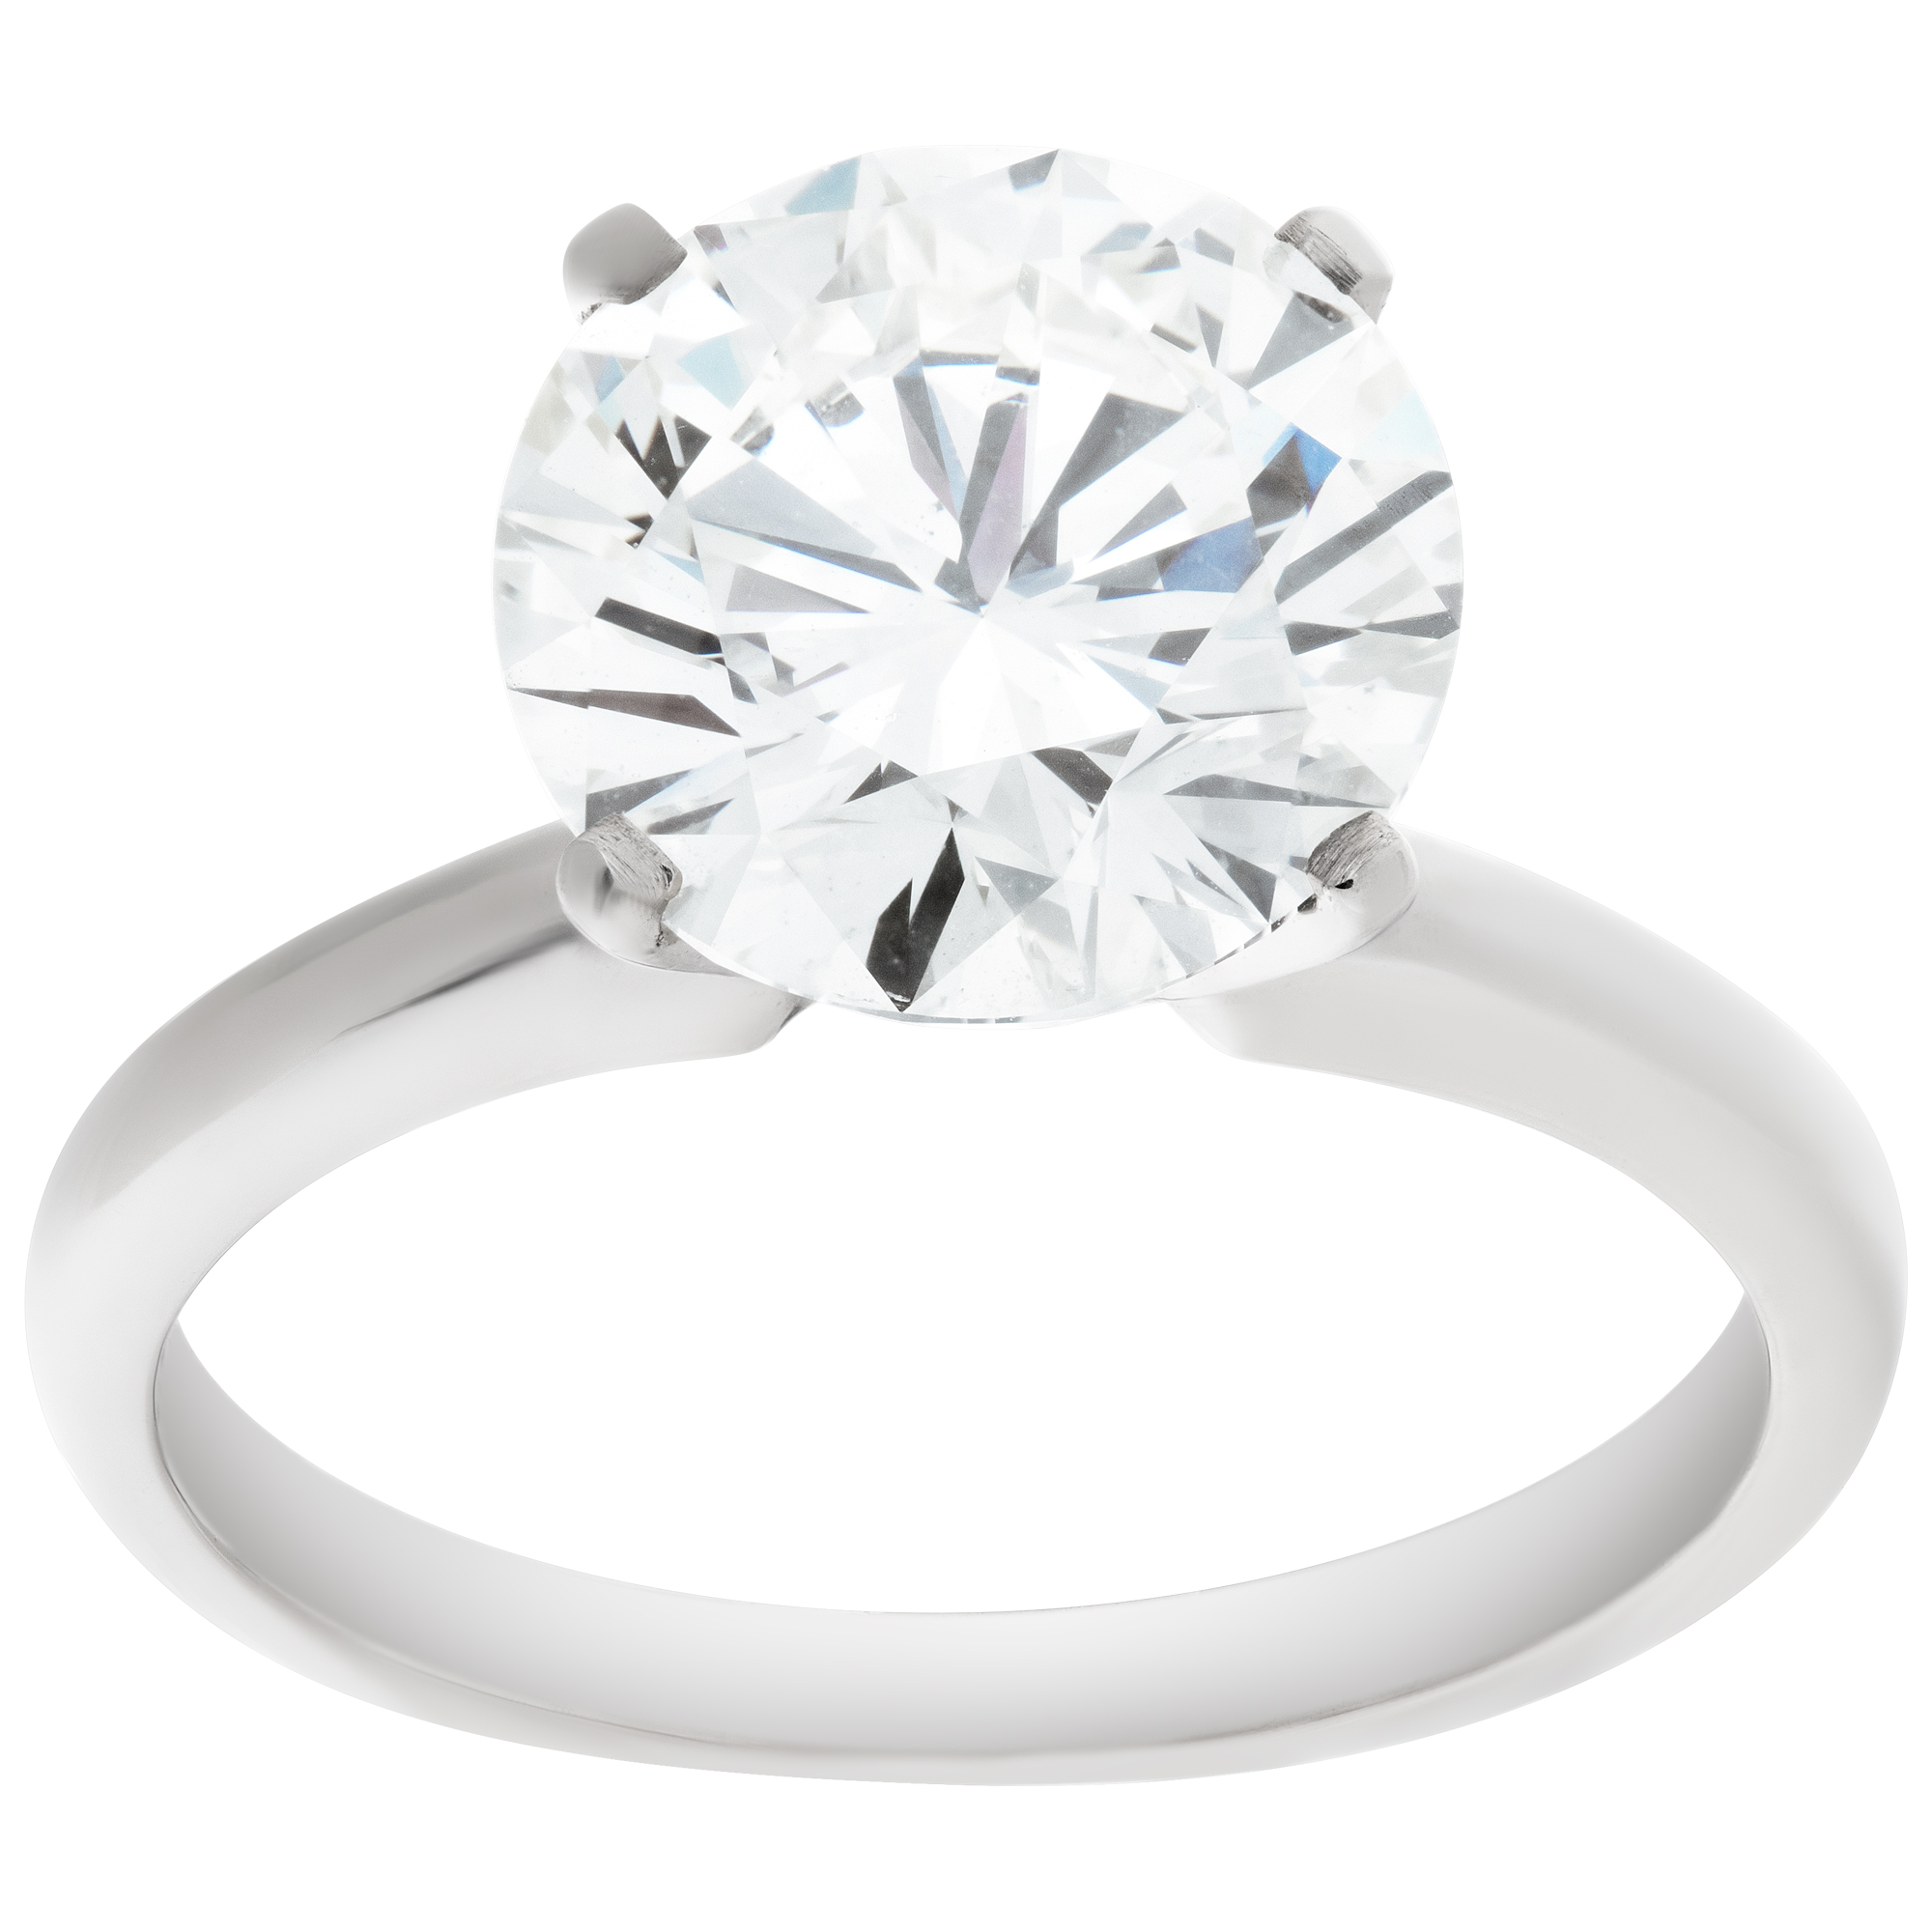 GIA certified round brilliant cut diamond 3.02 carat (L color, Internally Flawless clarity) solitair